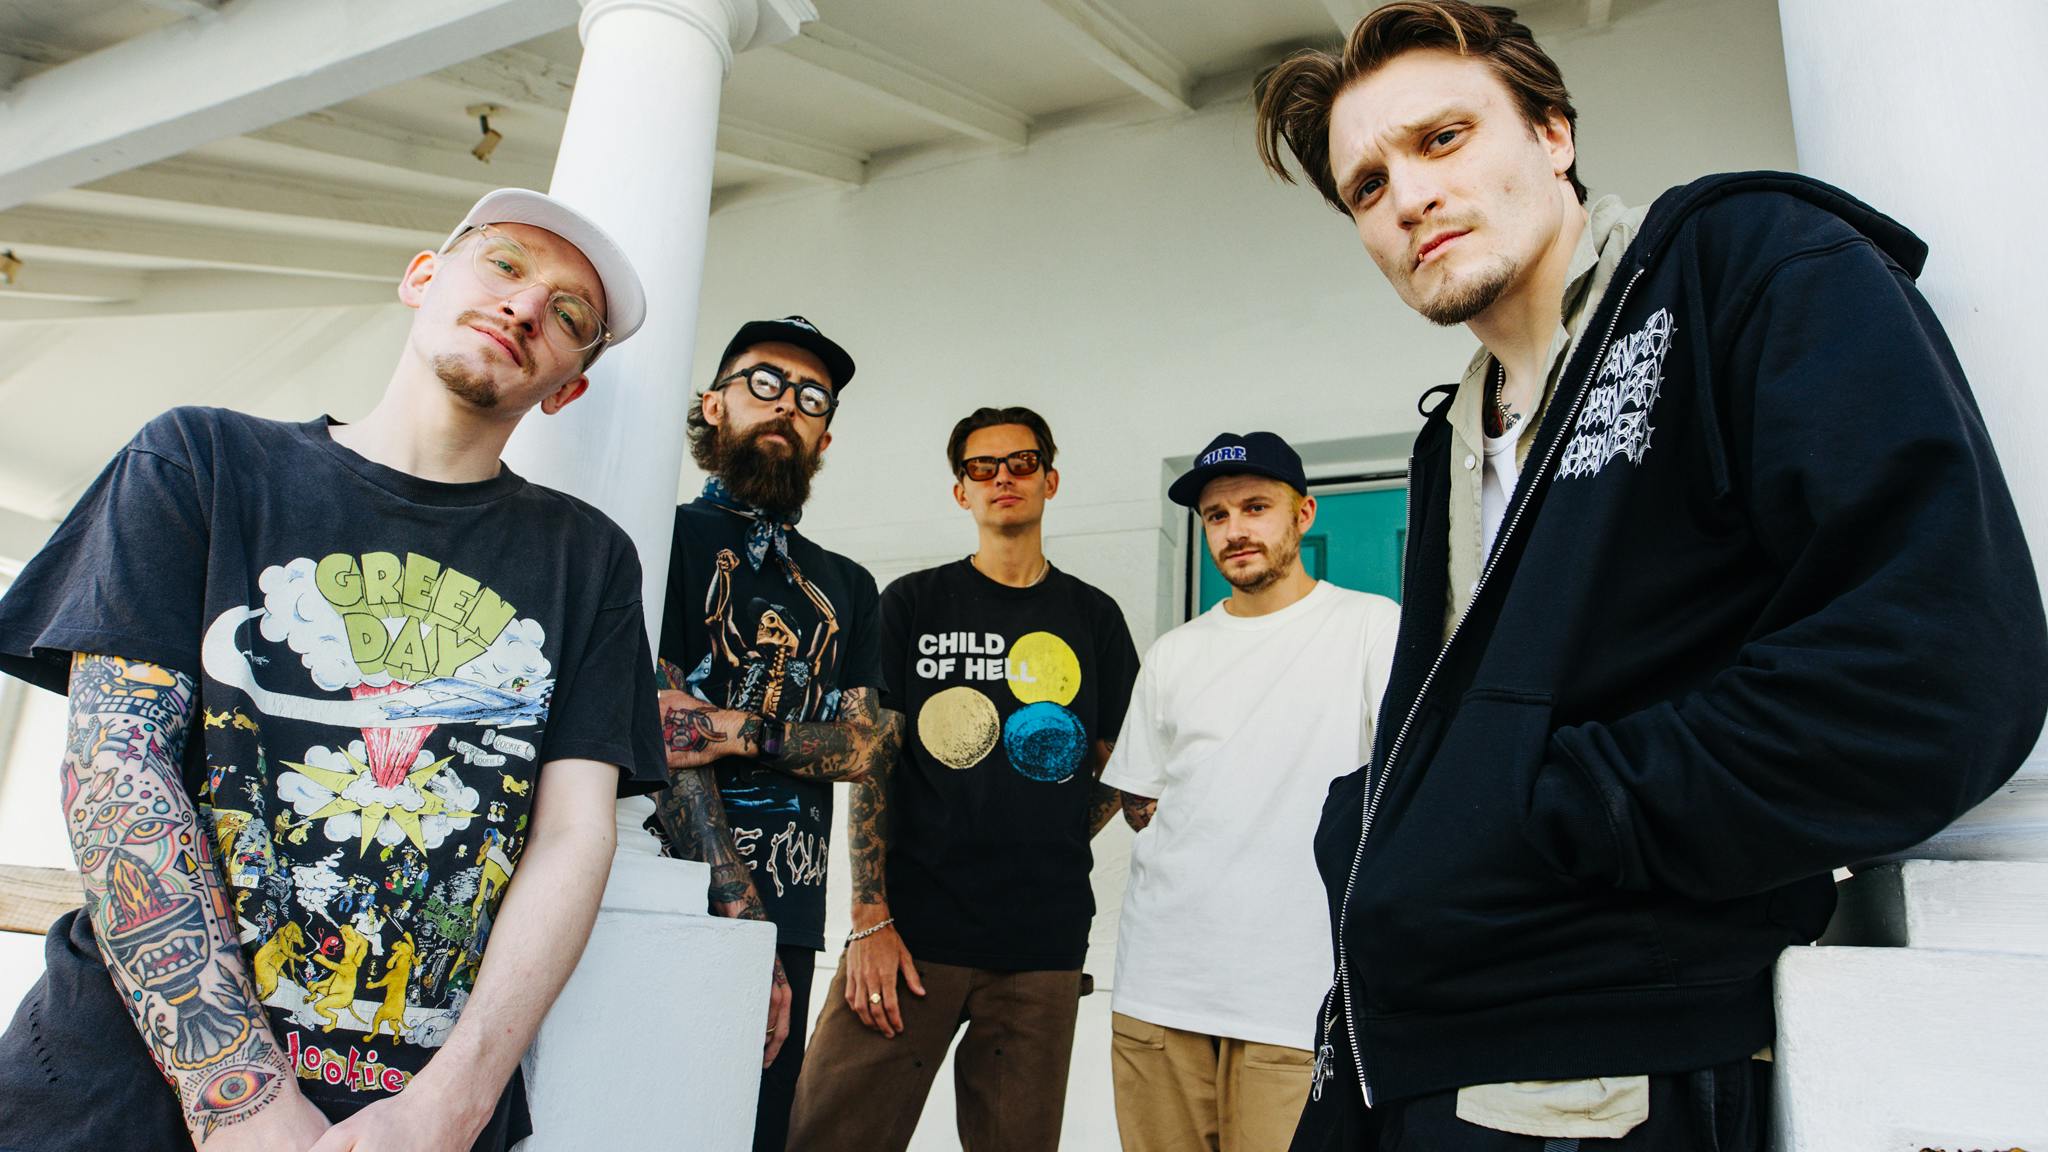 Ben Barlow: “We’re going back to our roots and we’re really stoked. This feels like Neck Deep”